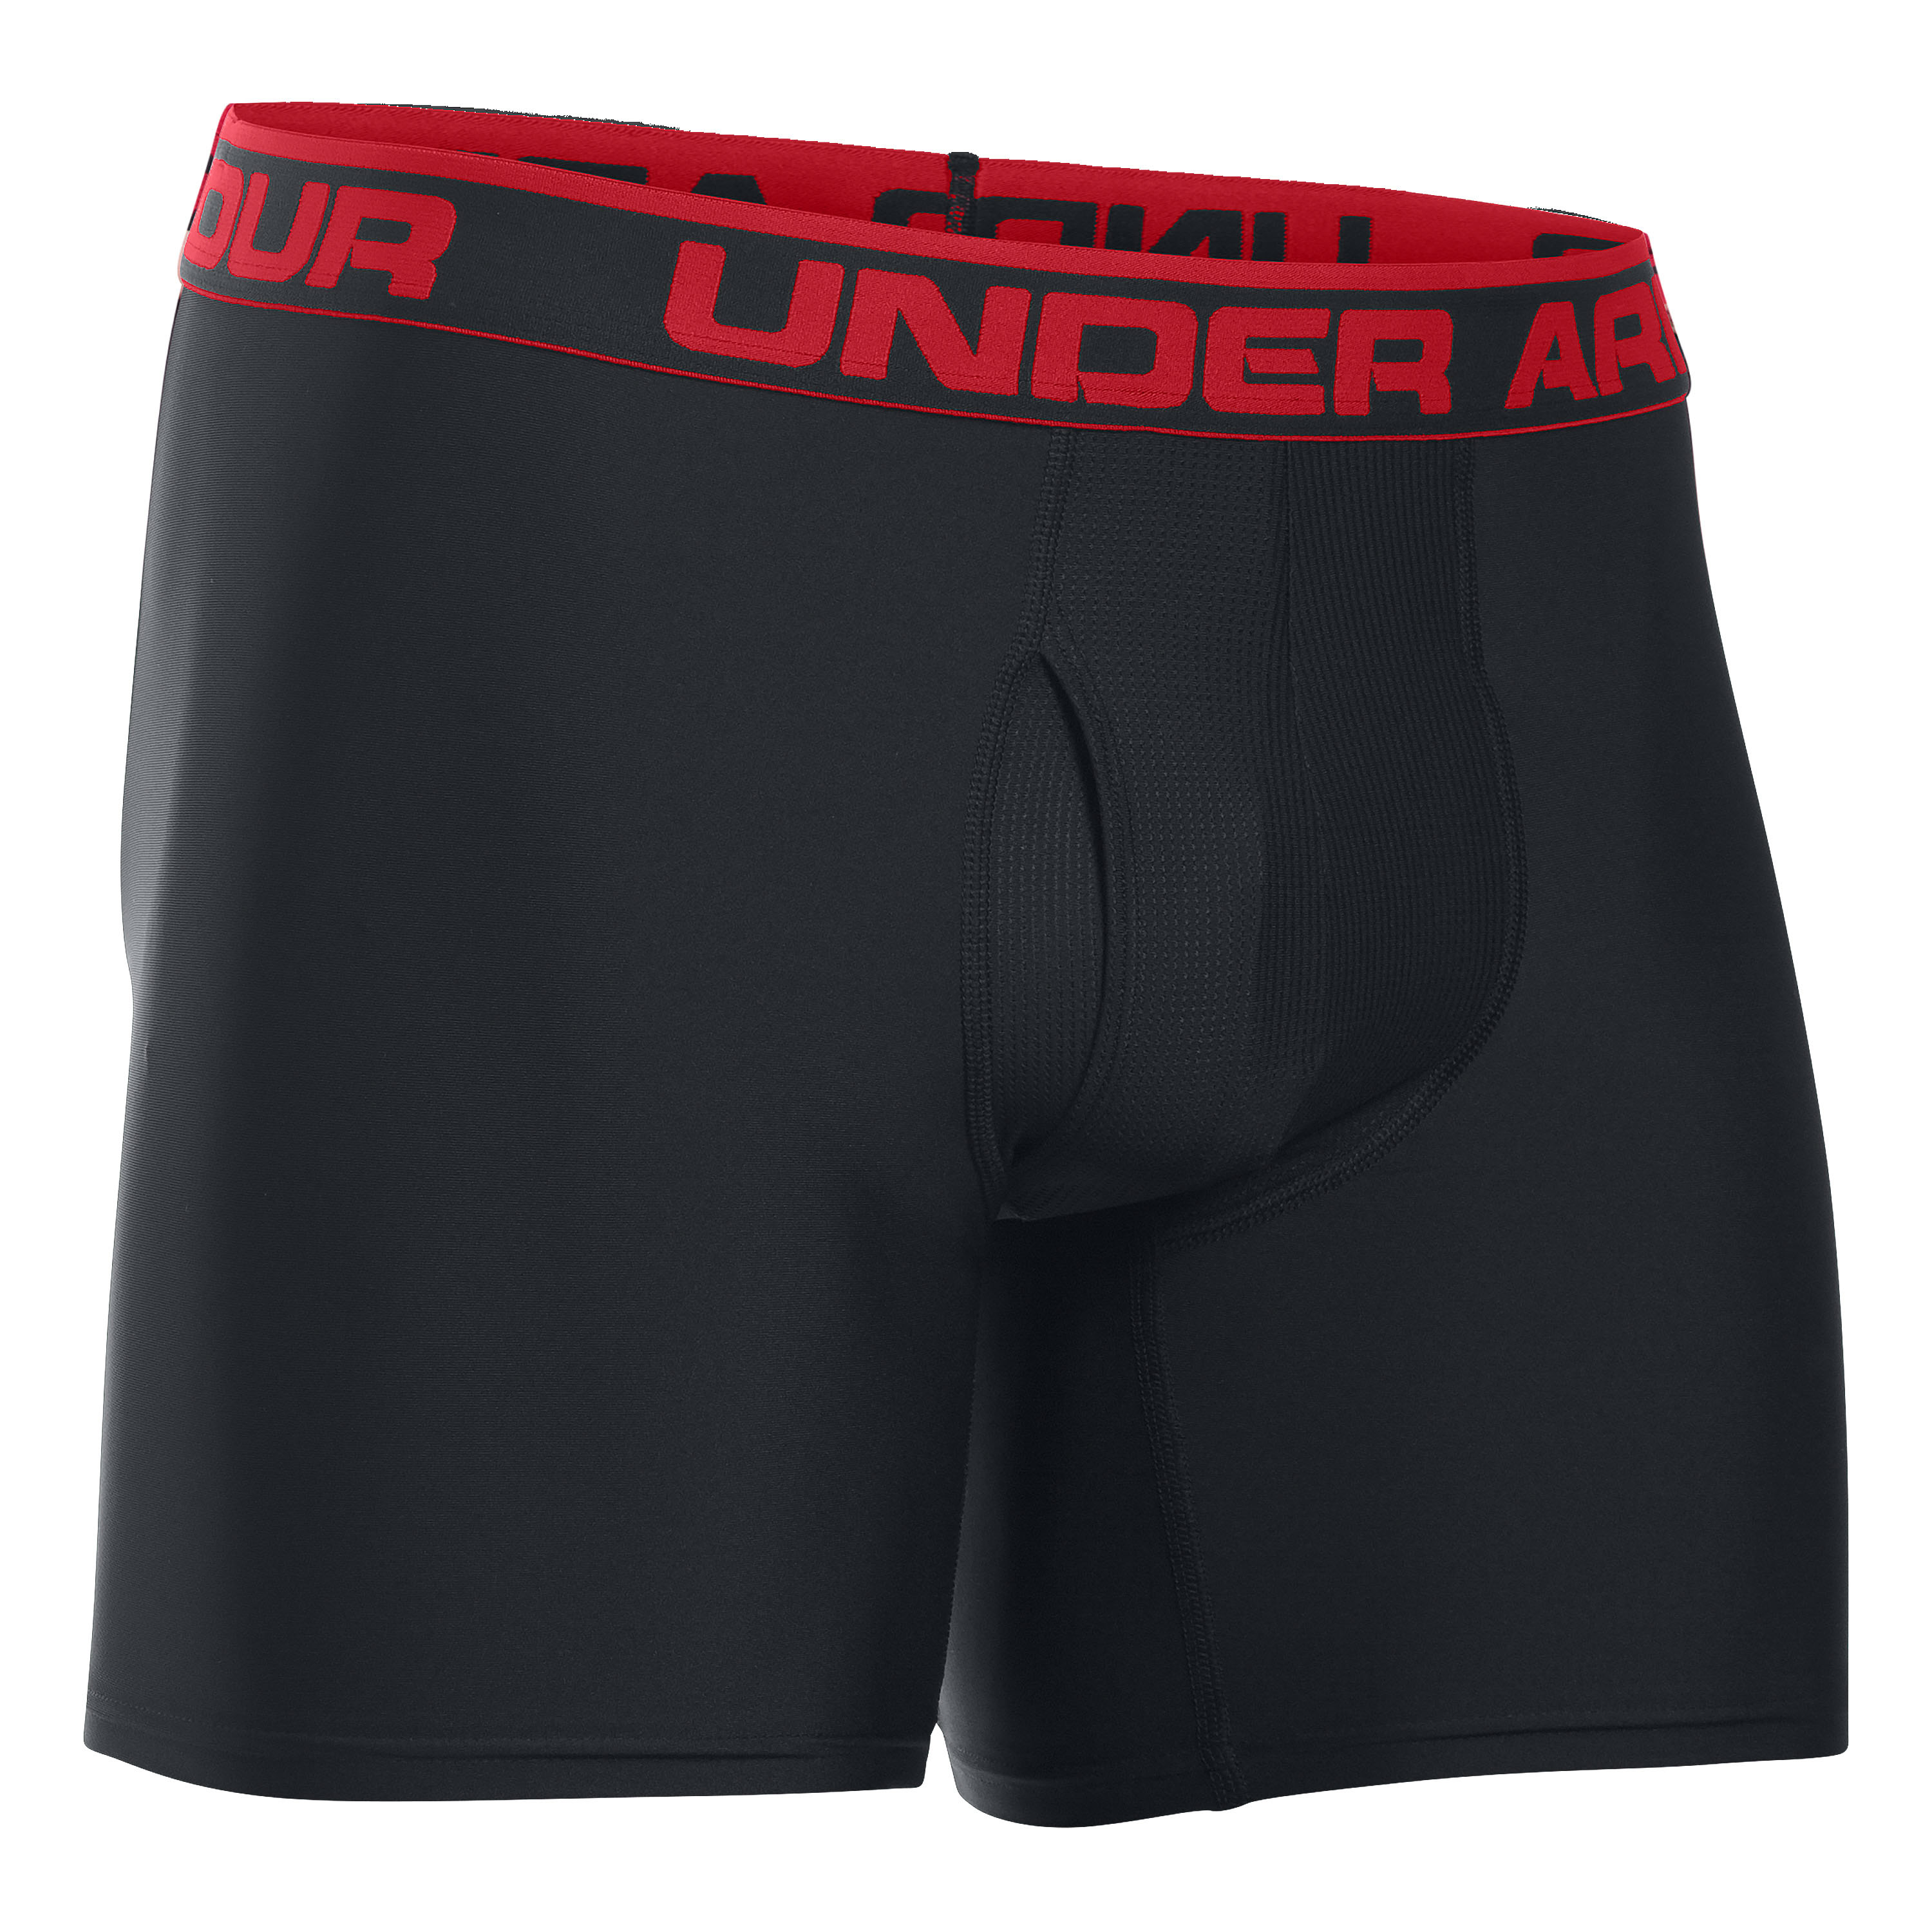 Purchase the Under Armour Boxer Shorts BoxerJock Long black/red